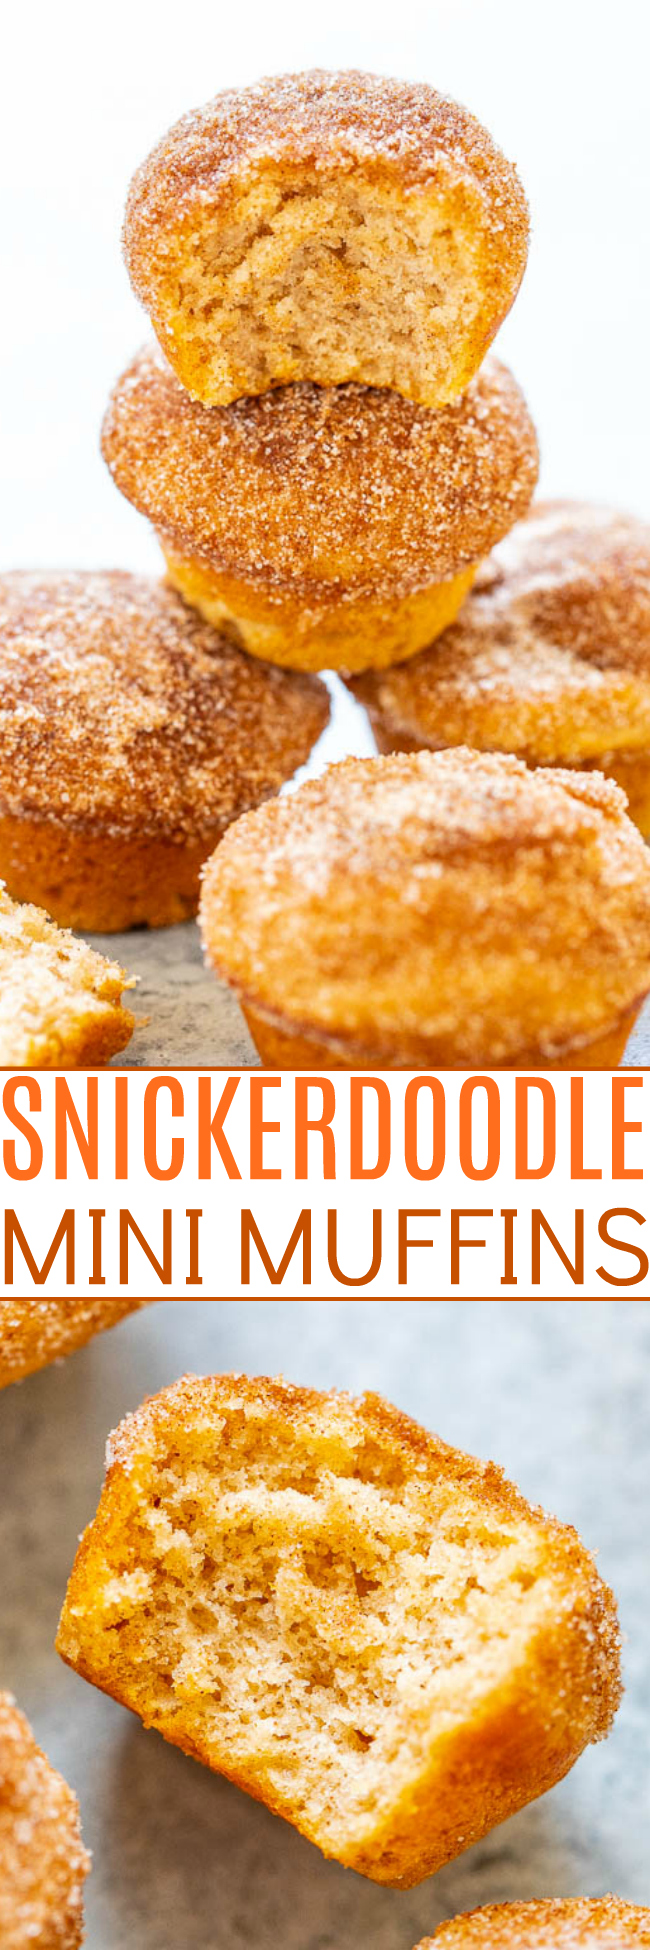 Mini Snickerdoodle Muffins — Bite size muffins that are coated in cinnamon-sugar that will remind you of snickerdoodle cookies, but in adorable mini muffin form!! Soft, tender, an EASY recipe that's ready in 30 minutes, and so IRRESISTIBLE!!